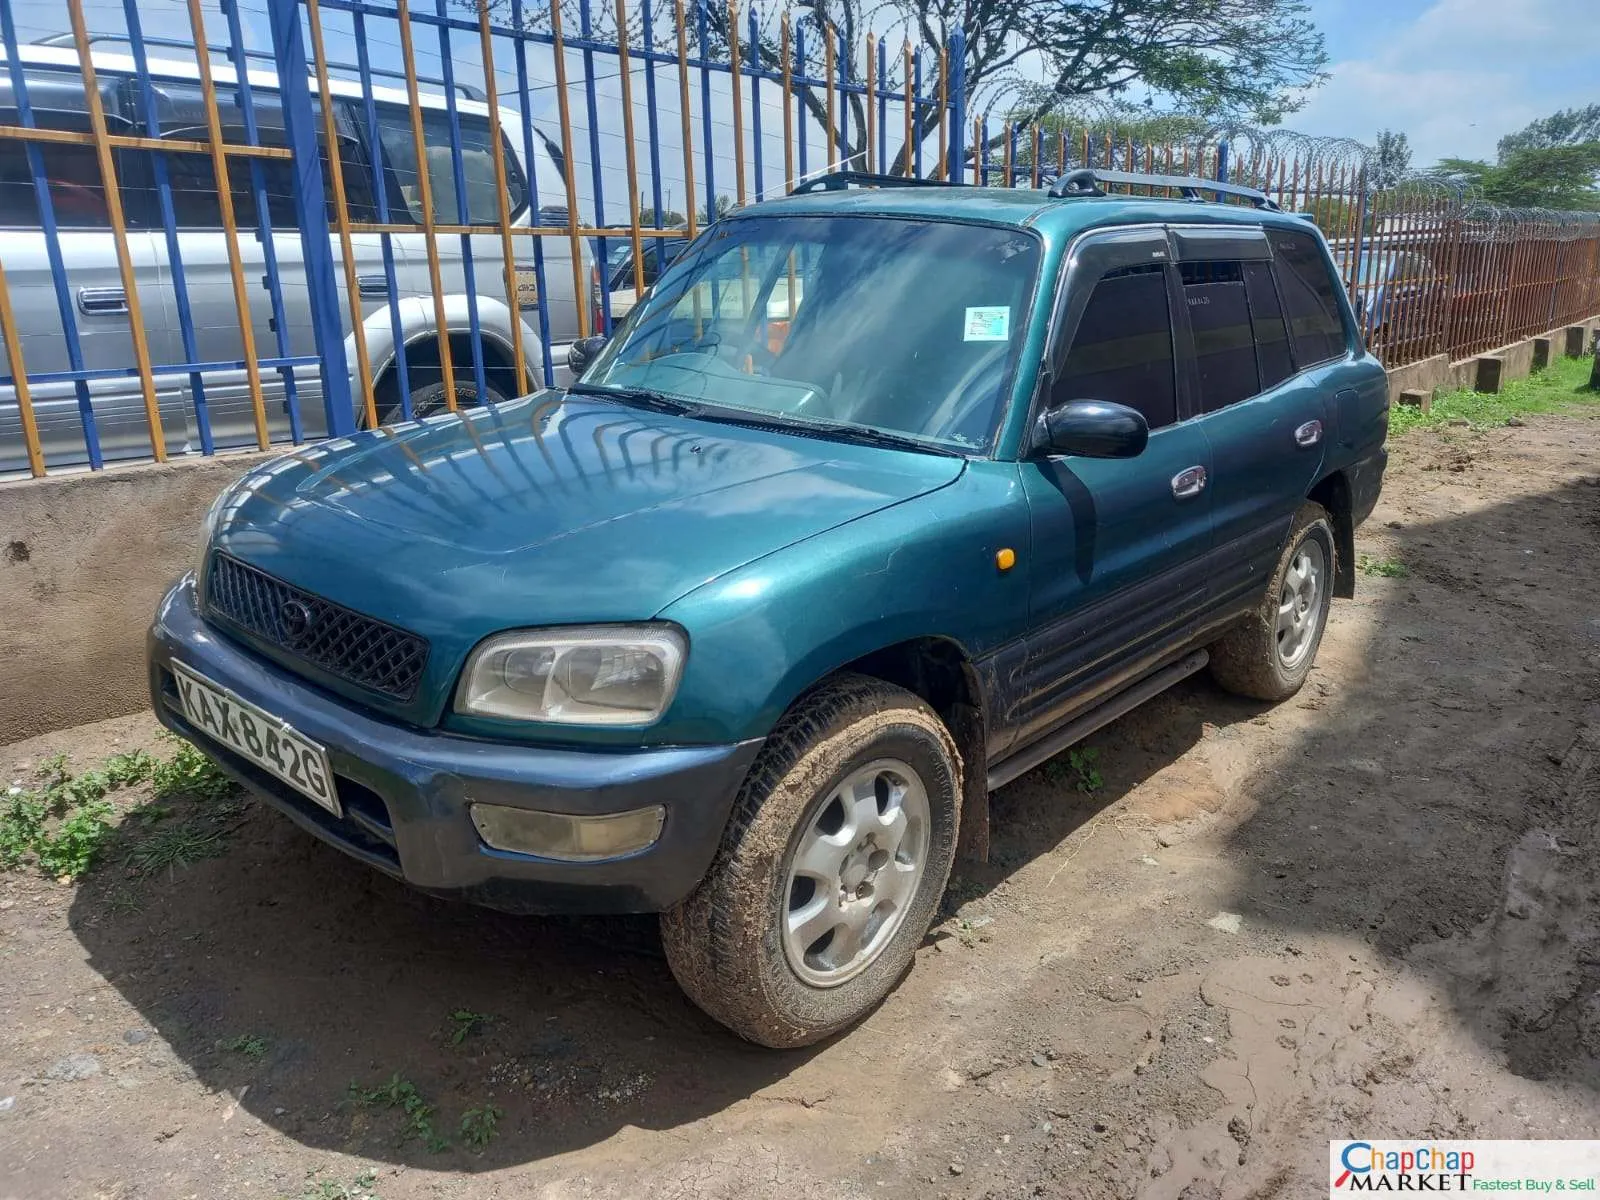 Cars Cars For Sale-Toyota RAV4 Kenya auto 300K Only Toyota RAV4 for sale in kenya You Pay 30% Deposit HIRE PURCHASE installments Trade in OK EXCLUSIVE 6